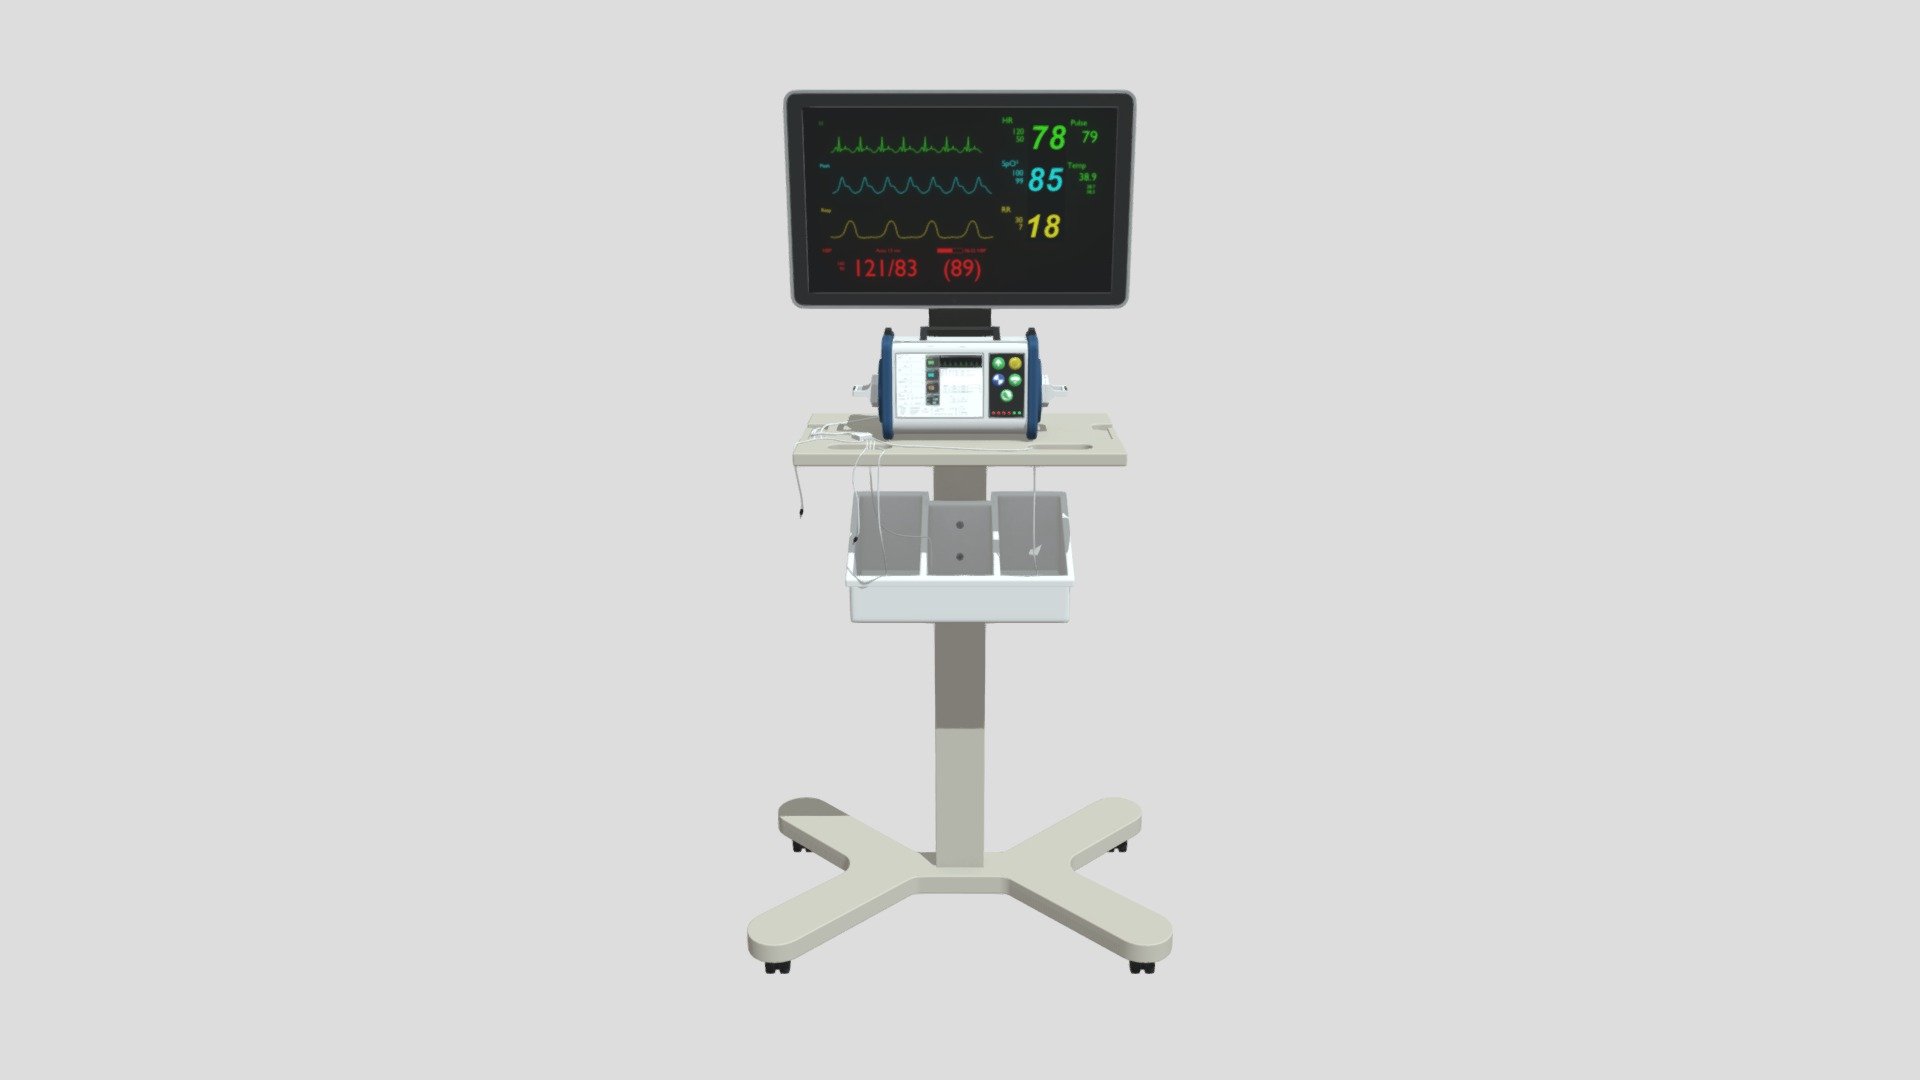 ECG Machine 3D model is a high quality, photo real model that will enhance detail and realism to any of your game projects or commercials. The model has a fully textured, detailed design that allows for close-up renders 3d model